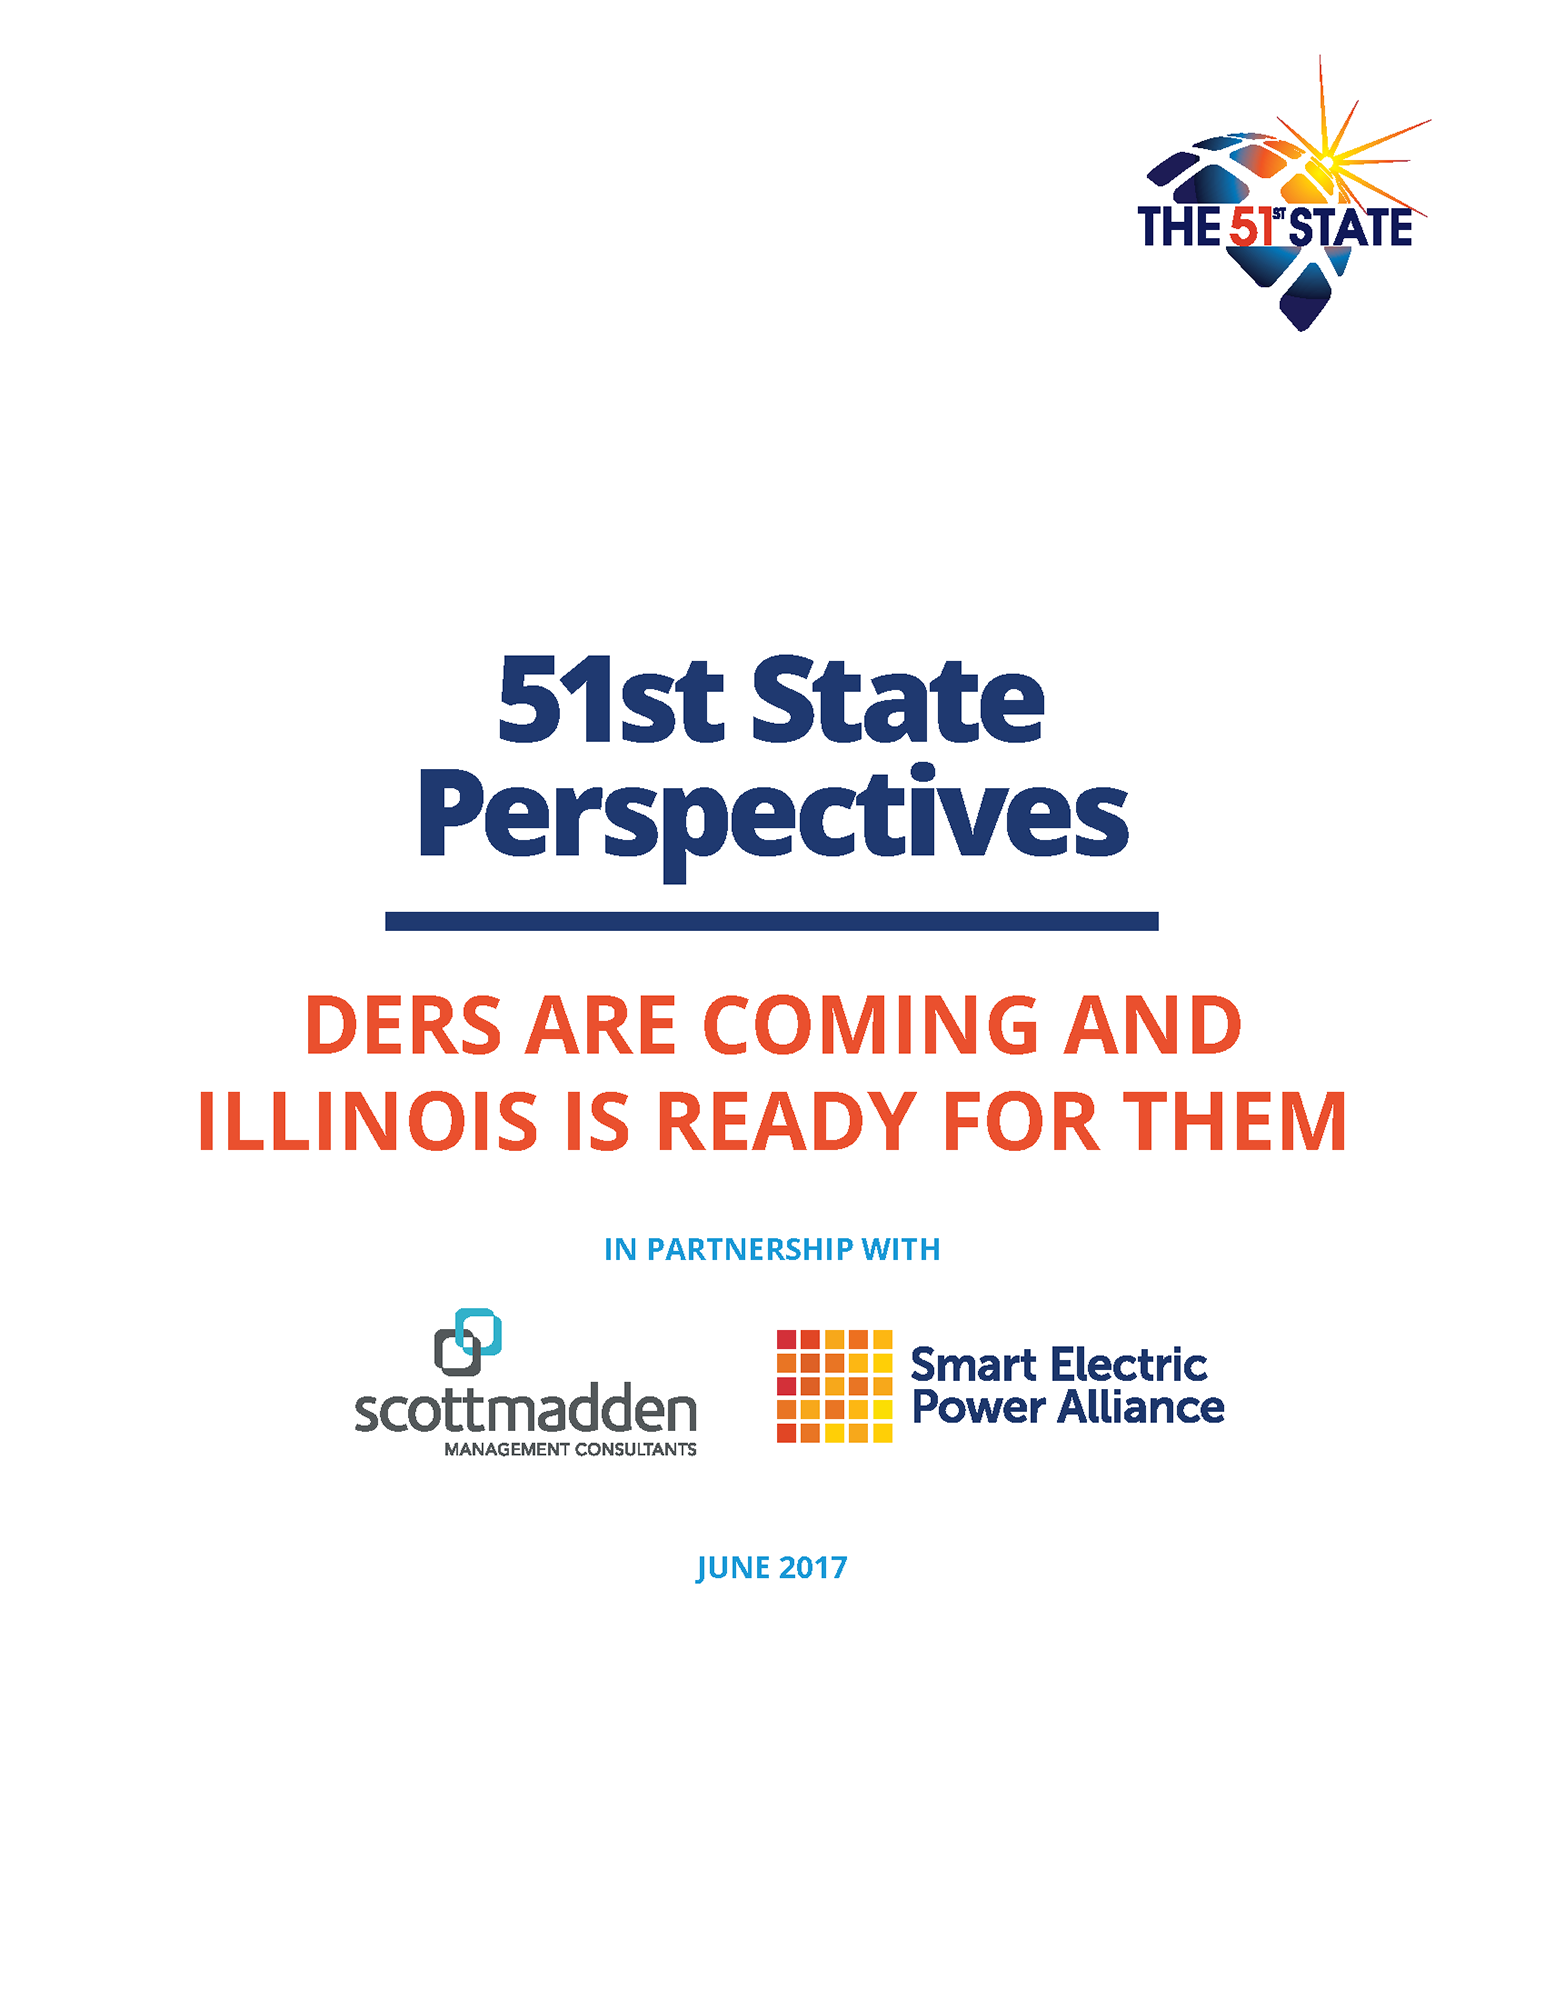 51st State Perspectives | DERs are Coming and Illinois is Ready for Them